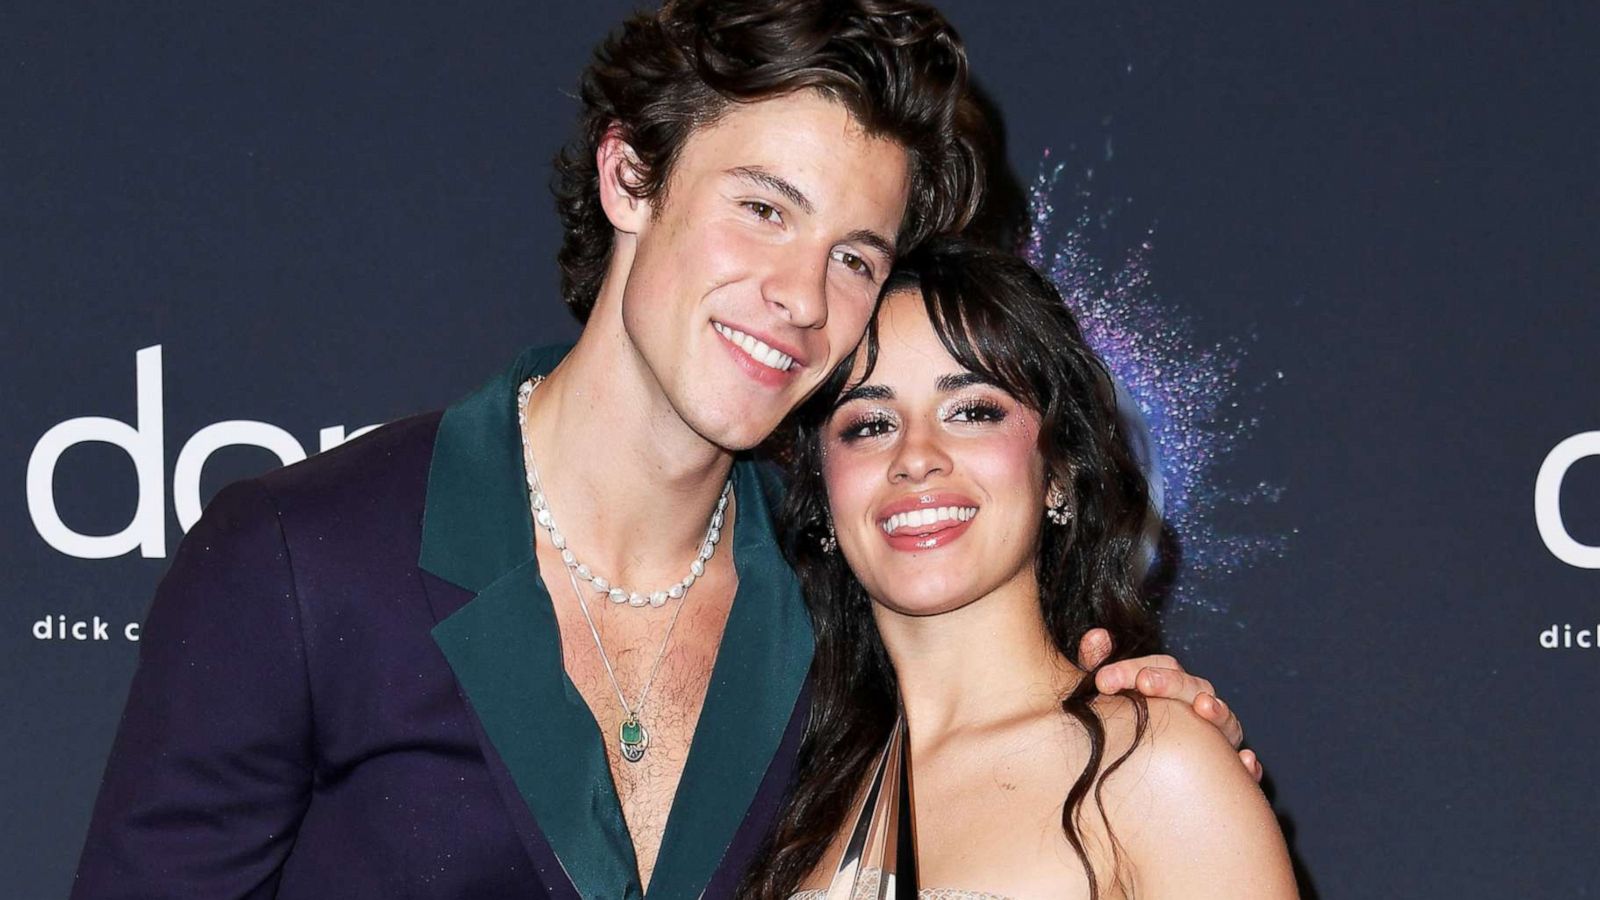 Shawn Mendes, Camila Cabello Met Gala 2021 Photos: Outfit Pictures